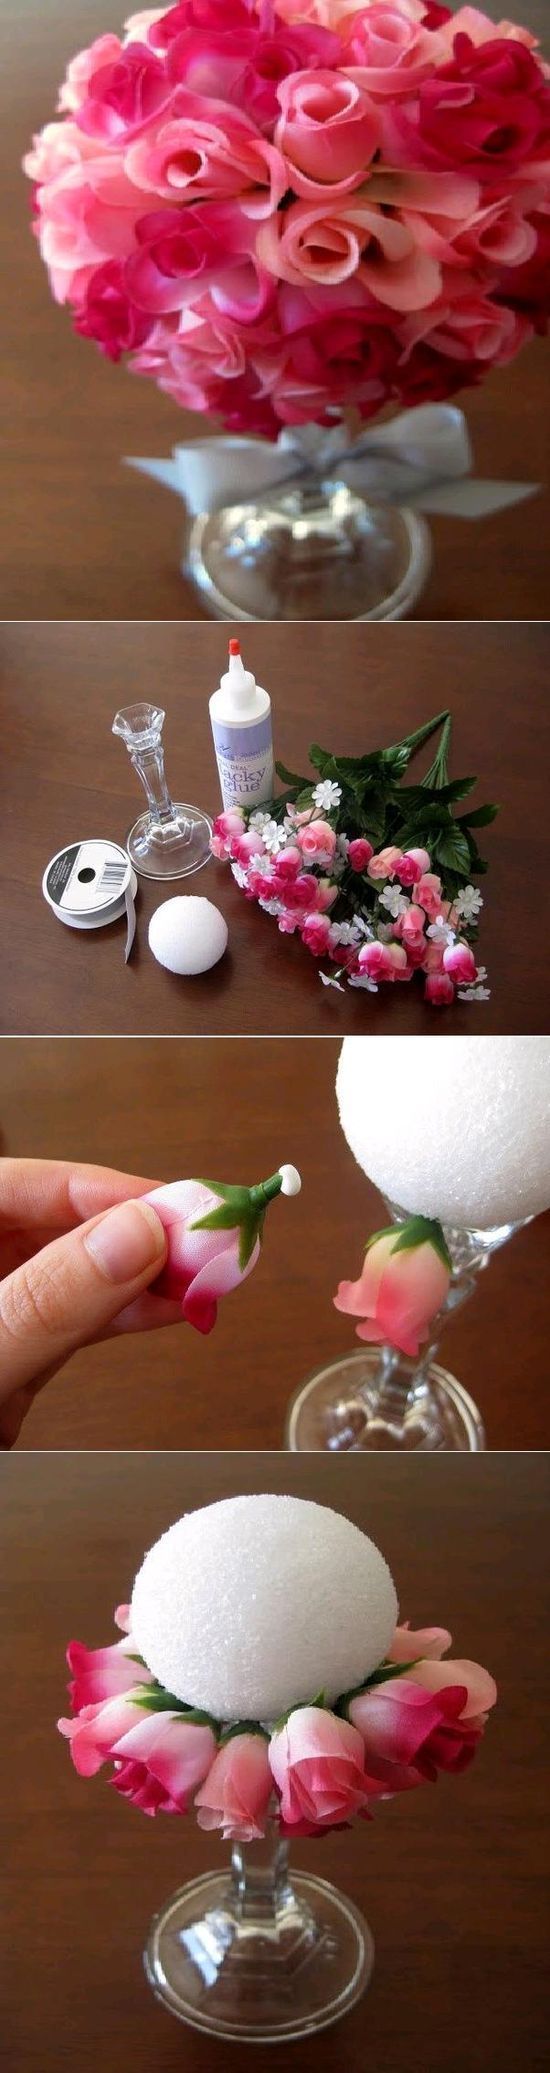 Cute Idea! Would Be Fun To Try One And See How It Looks And How Long It Takes To Make.